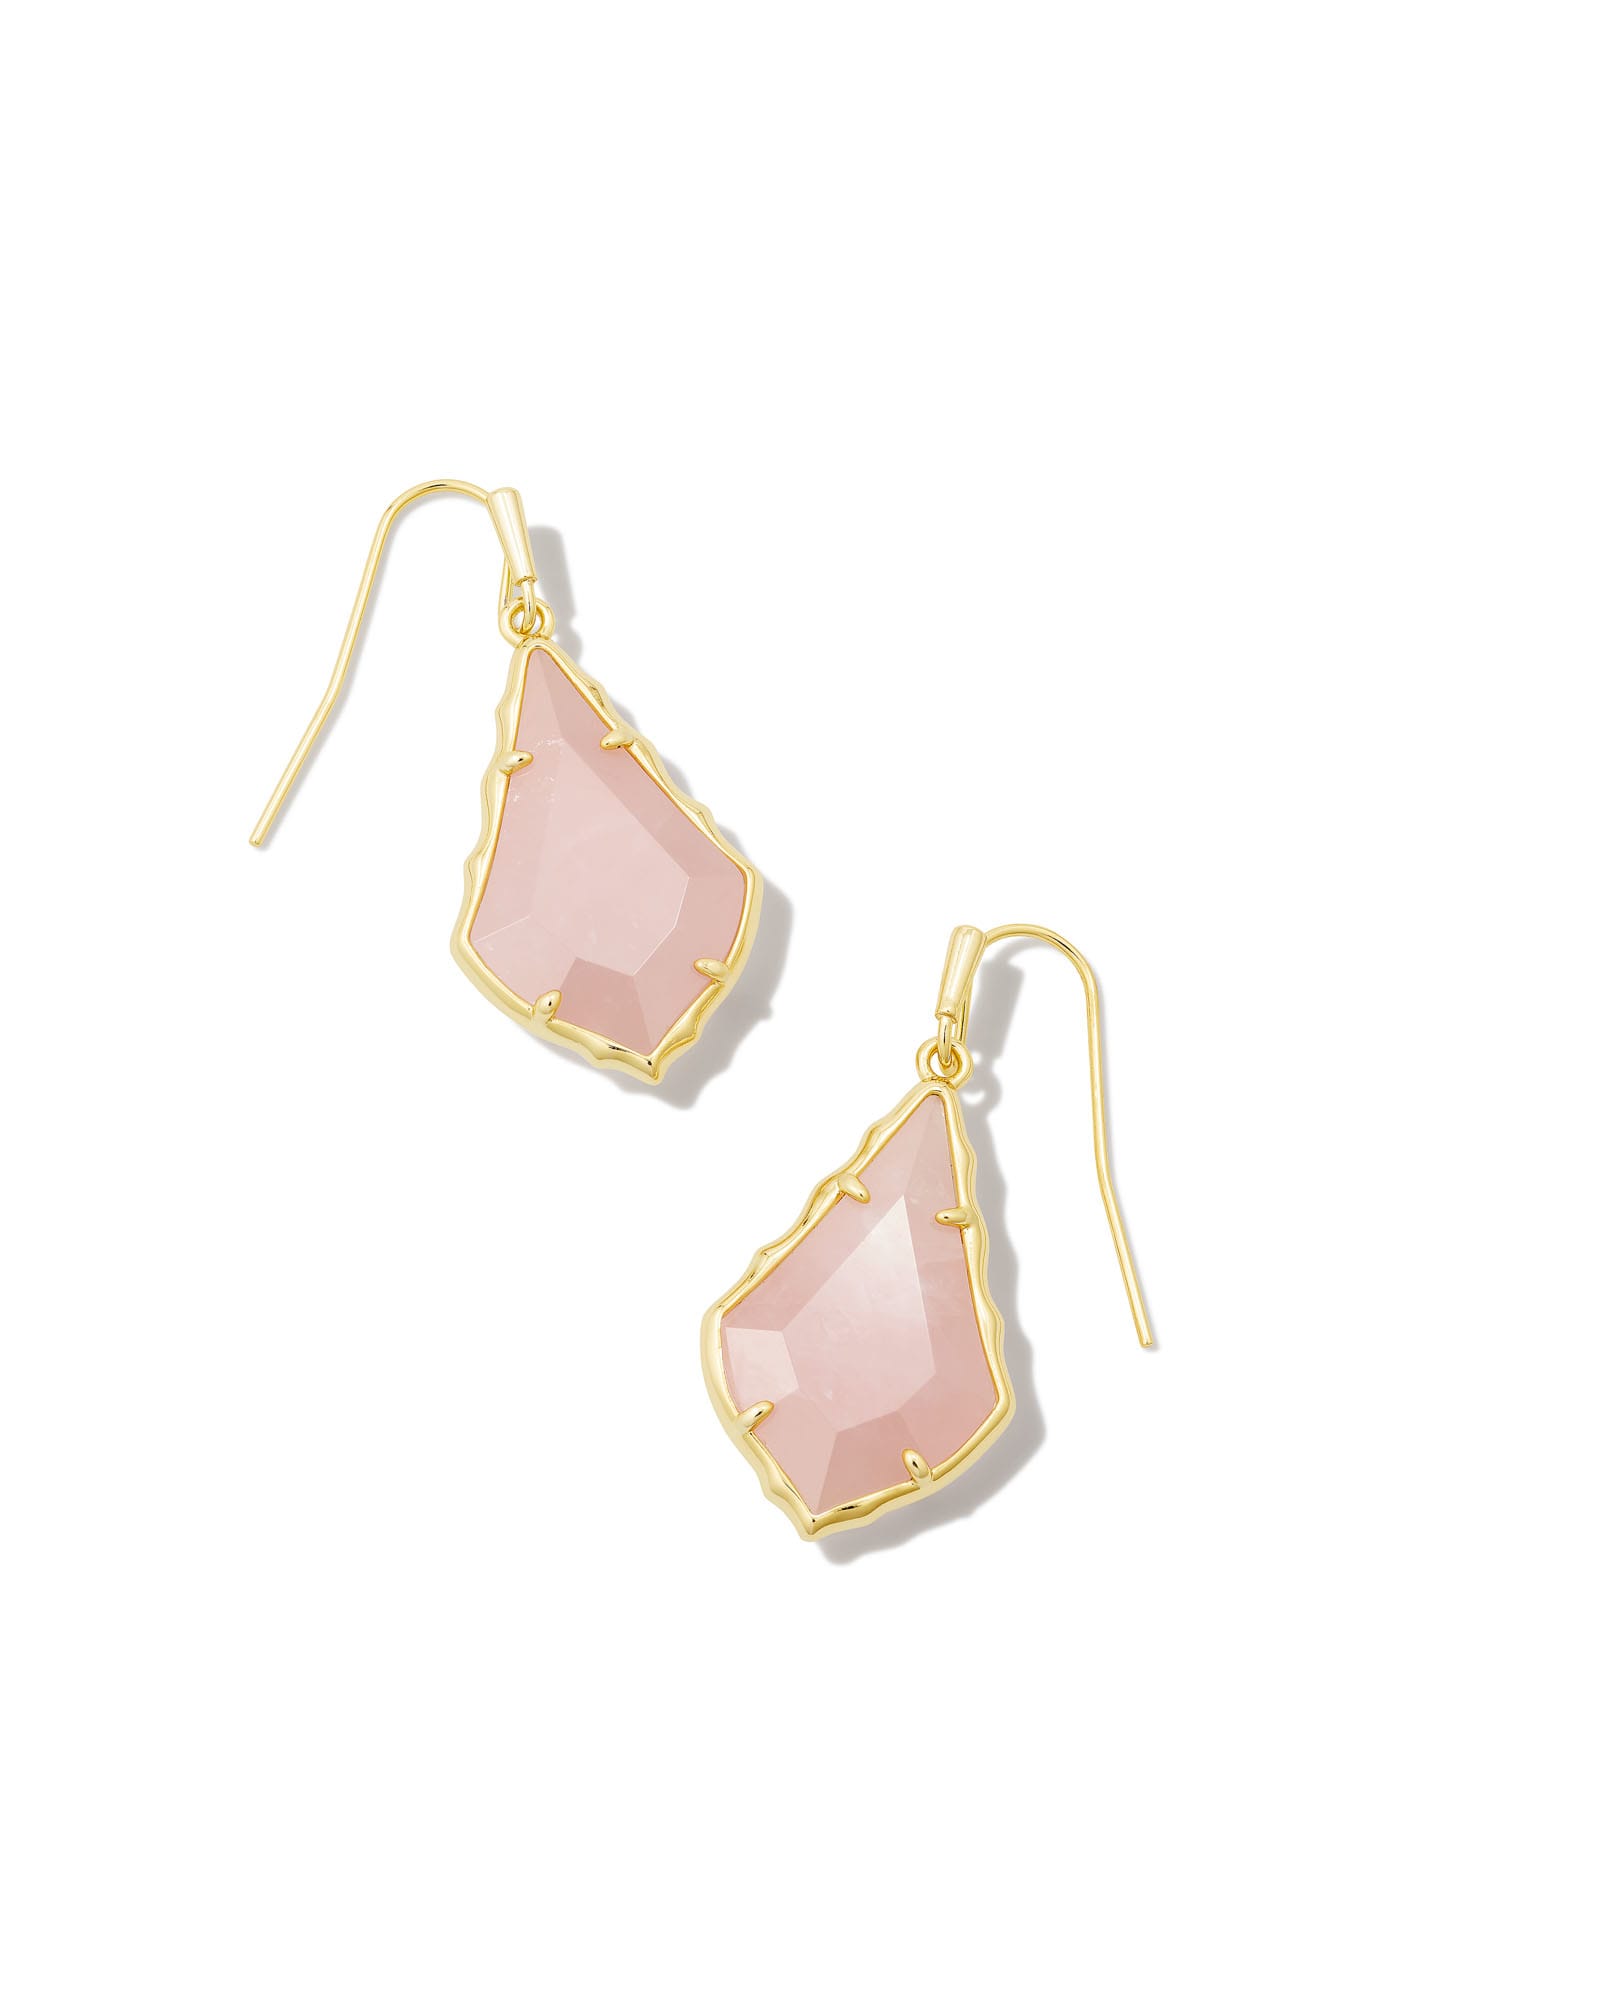 Small Faceted Alex Gold Drop Earrings in Rose Quartz